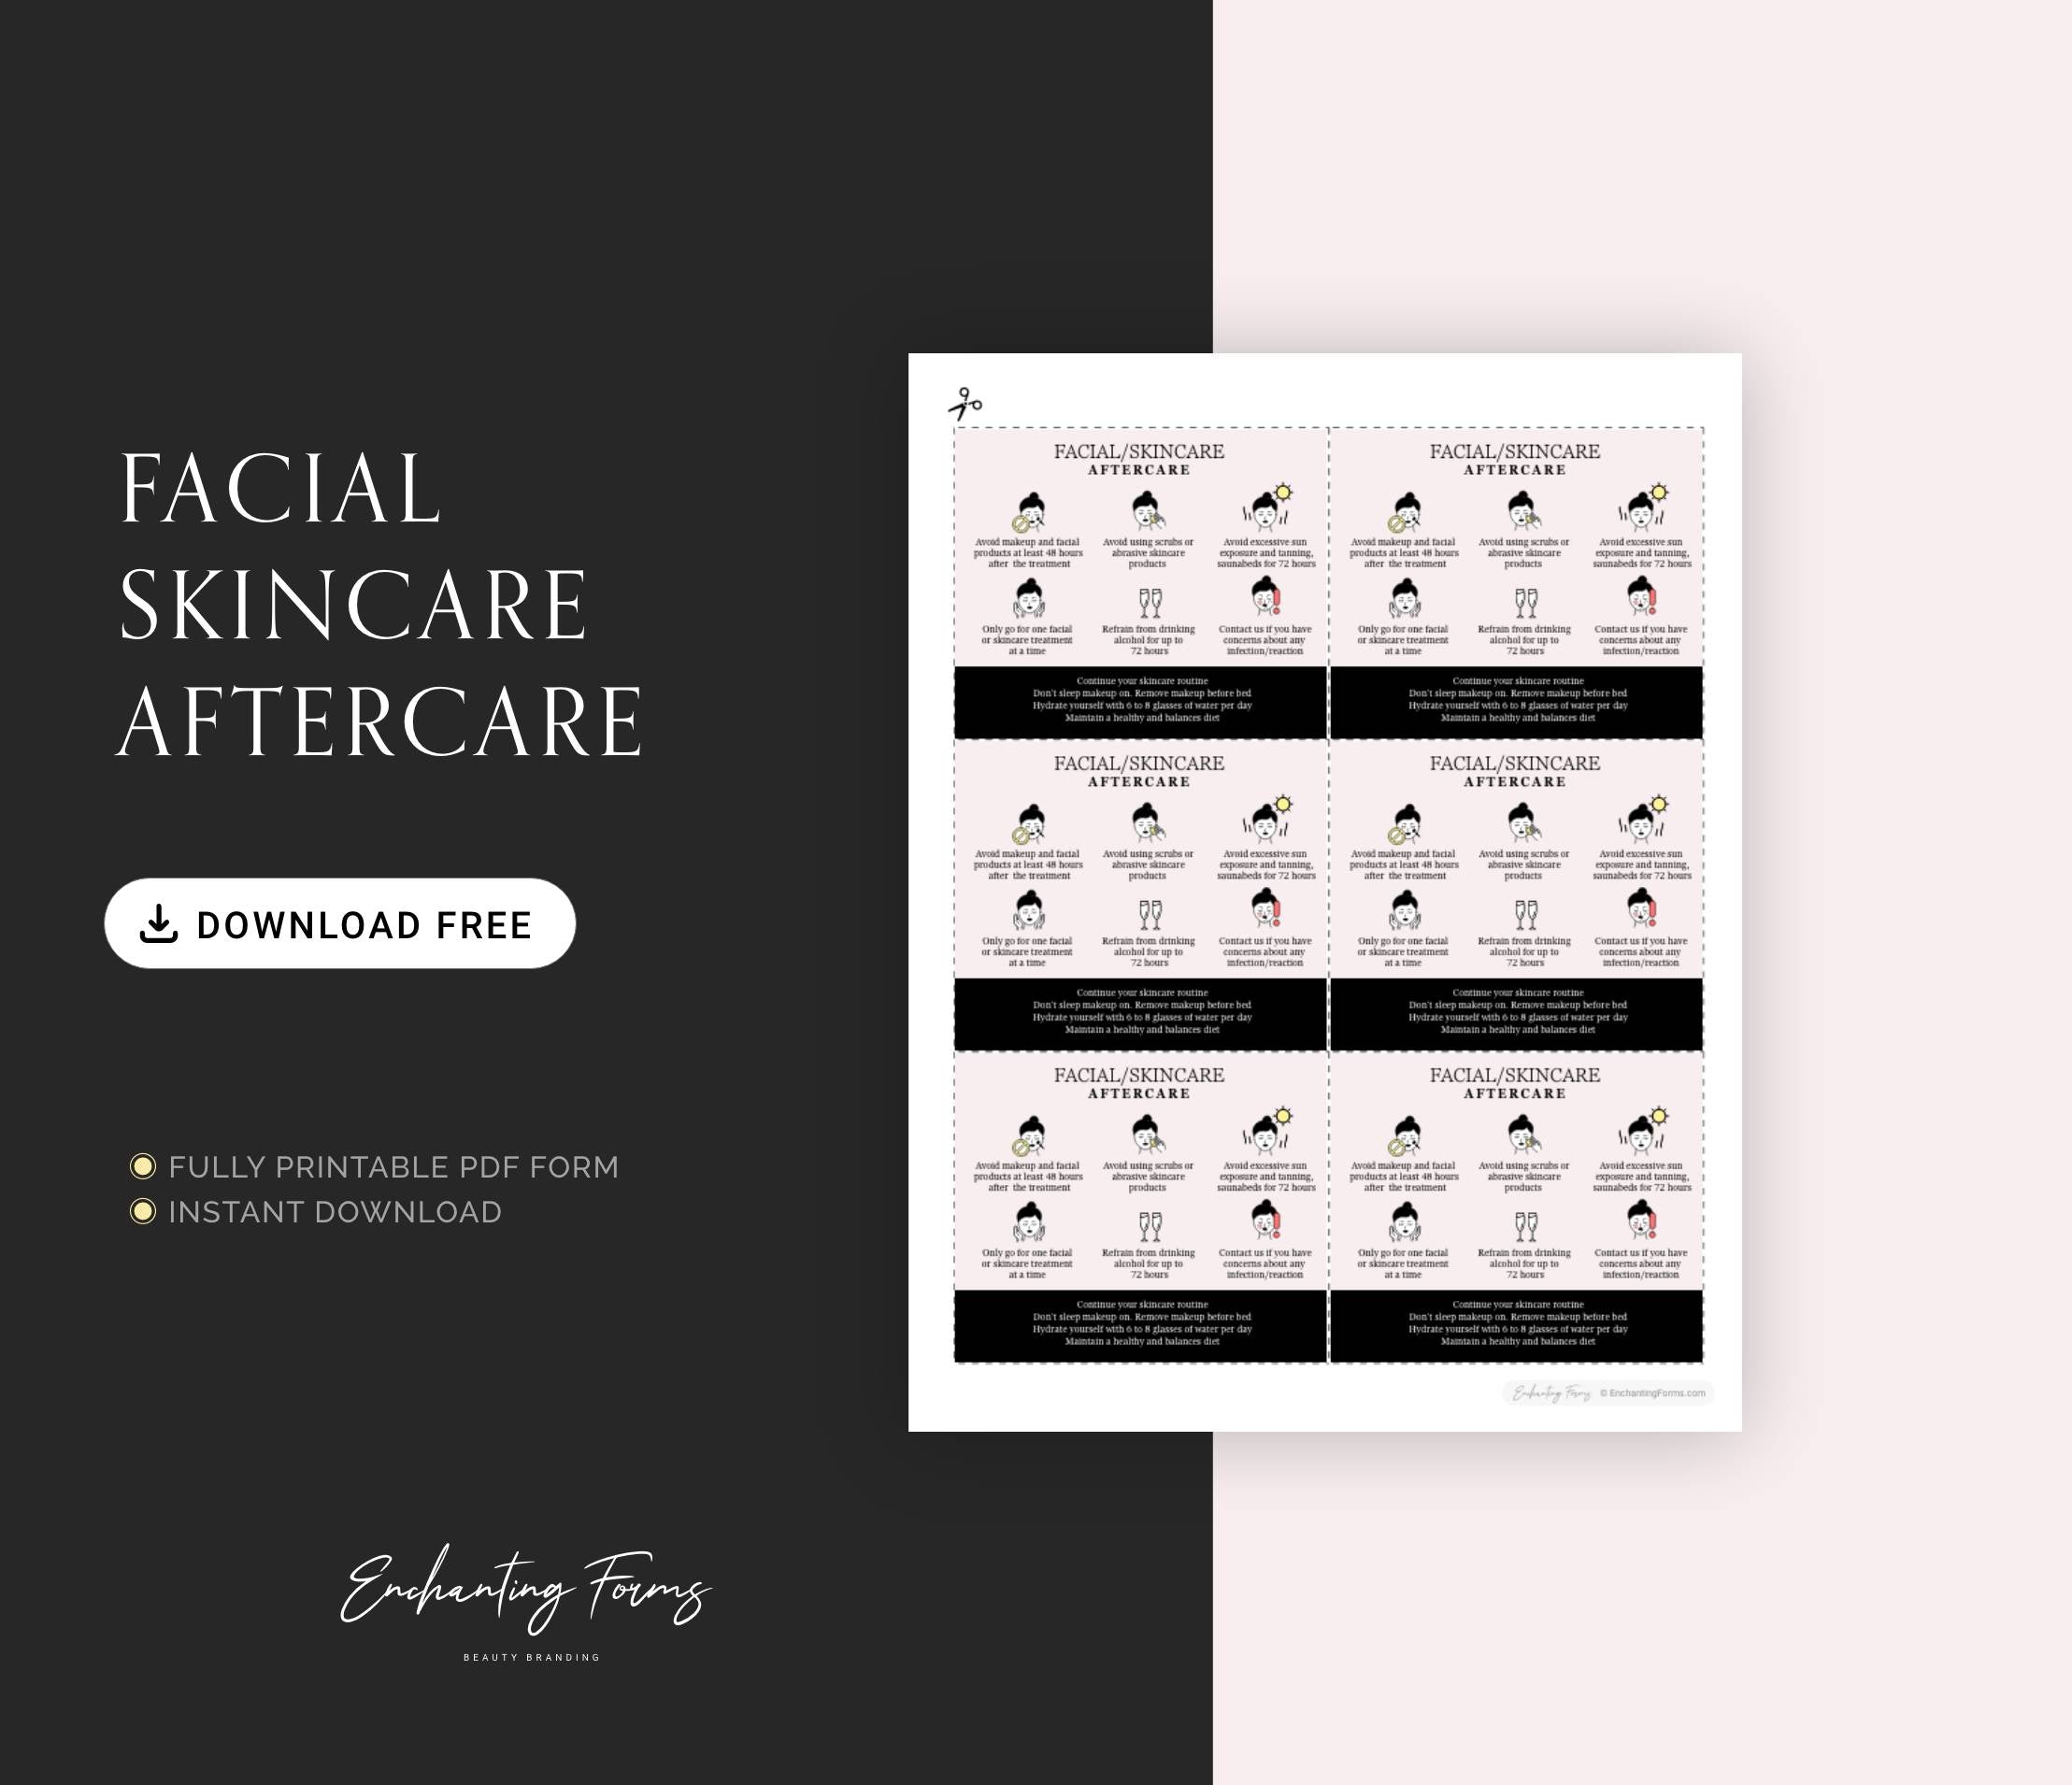 Facial Skincare Aftercare cards - Free Download